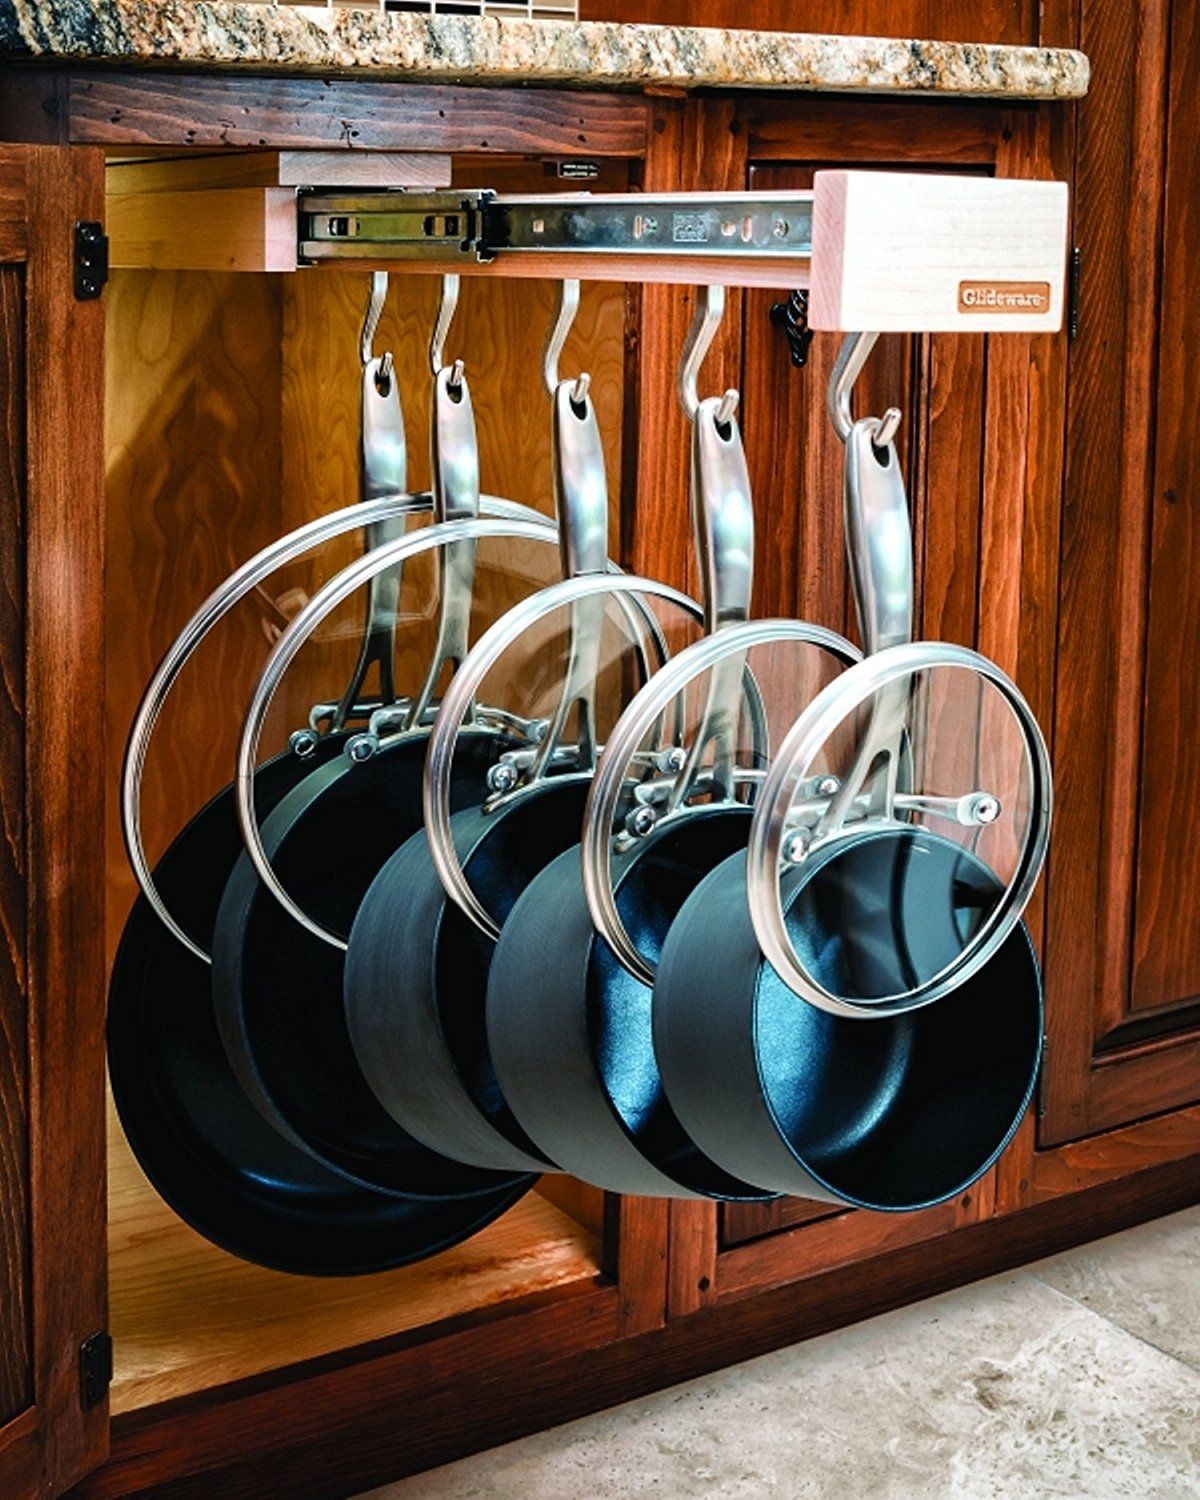 https://hips.hearstapps.com/housebeautiful/assets/17/17/1493048361-pull-out-pots-and-pans.jpg